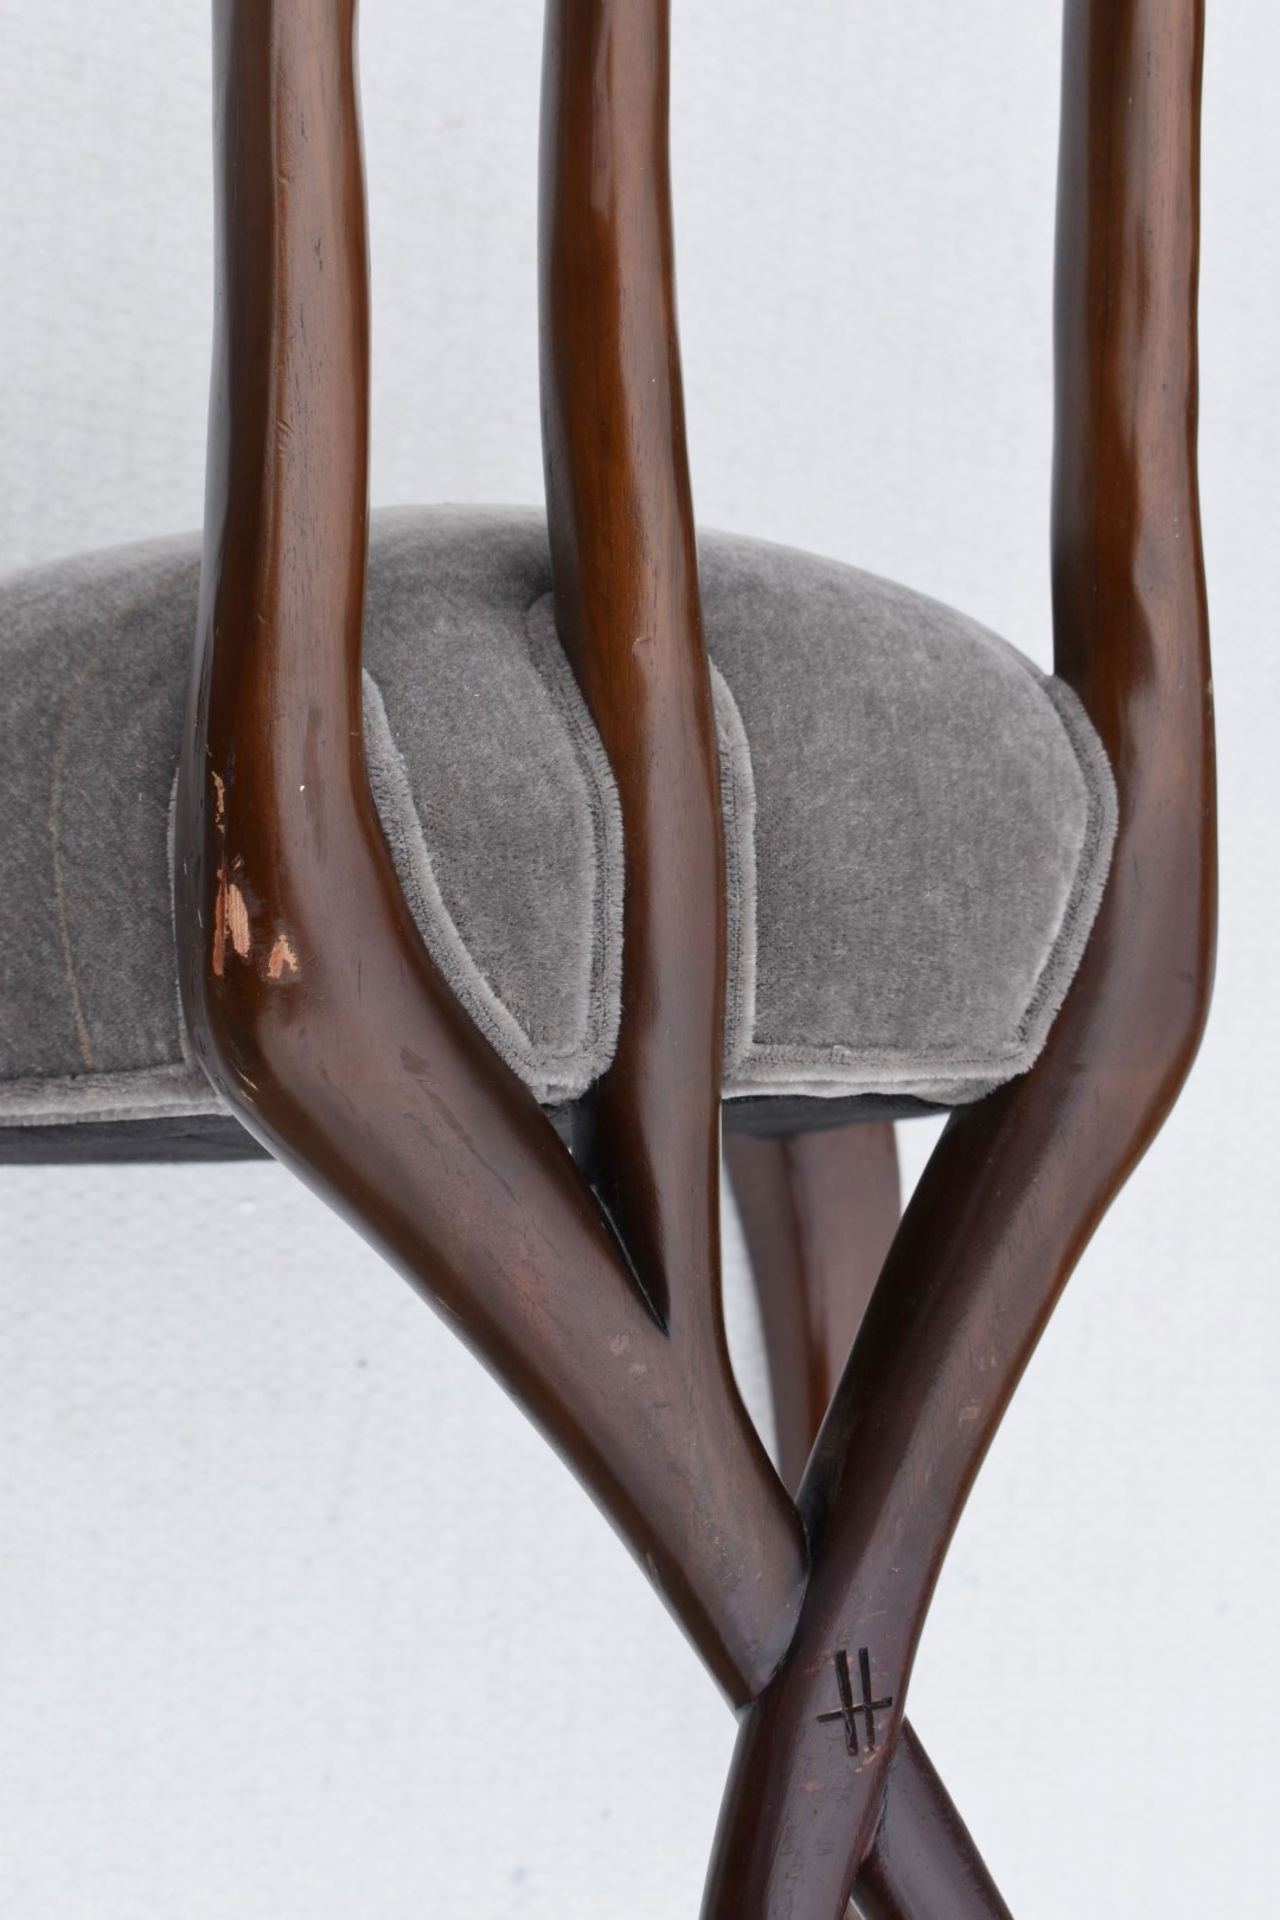 1 x CHRISTOPHER GUY 'Le Jardin' Luxury Hand-carved Solid Mahogany Designer Dining Chair - Recently - Image 9 of 10